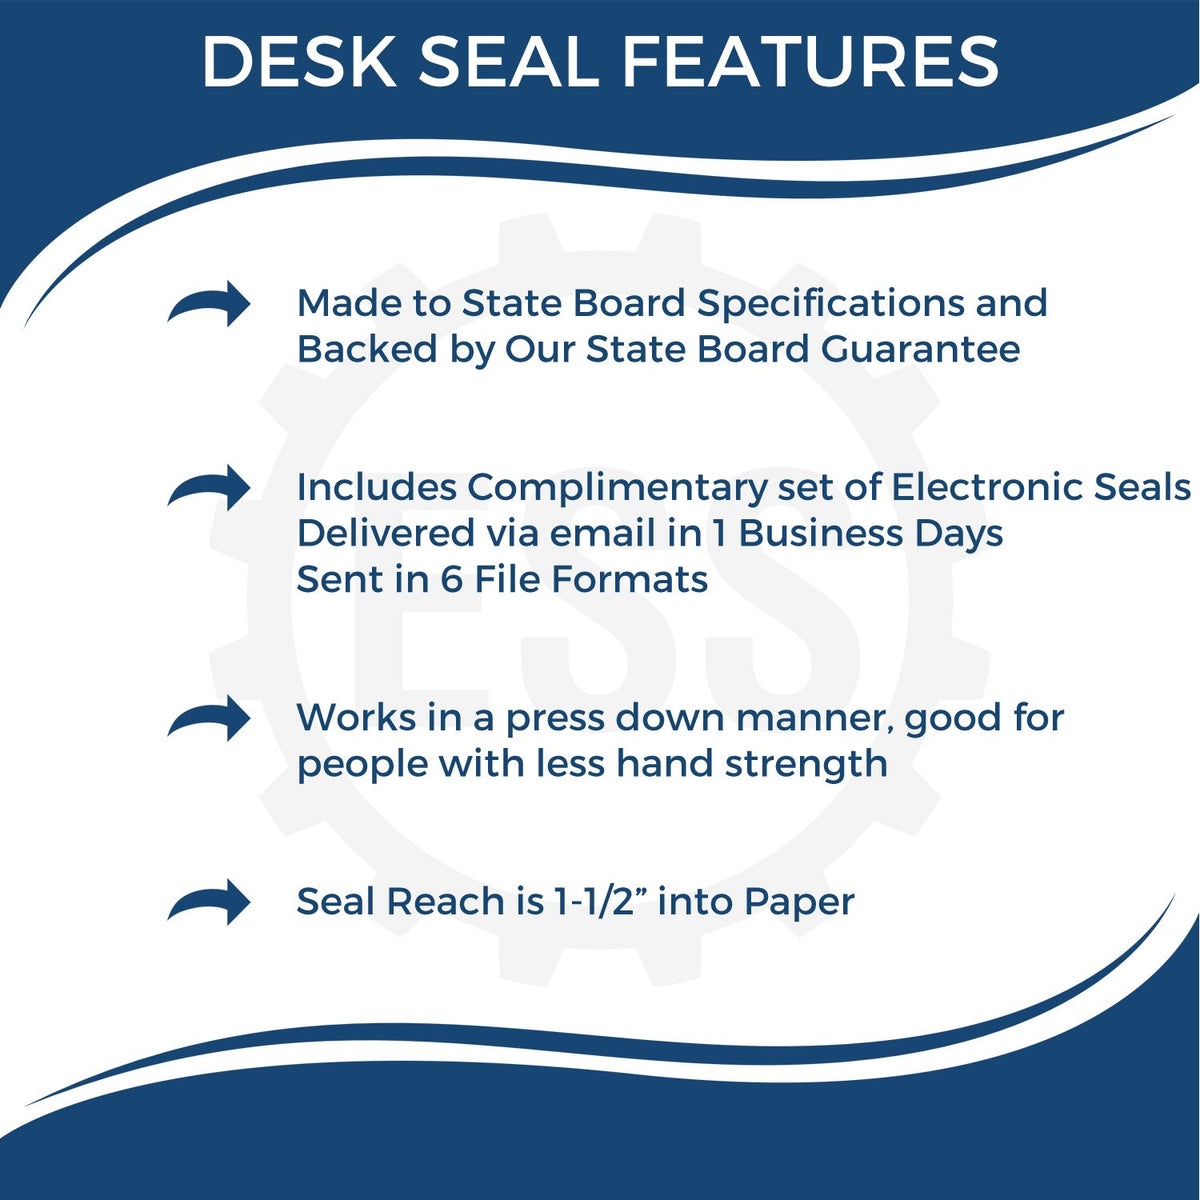 A picture of an infographic highlighting the selling points for the Colorado Geologist Desk Seal